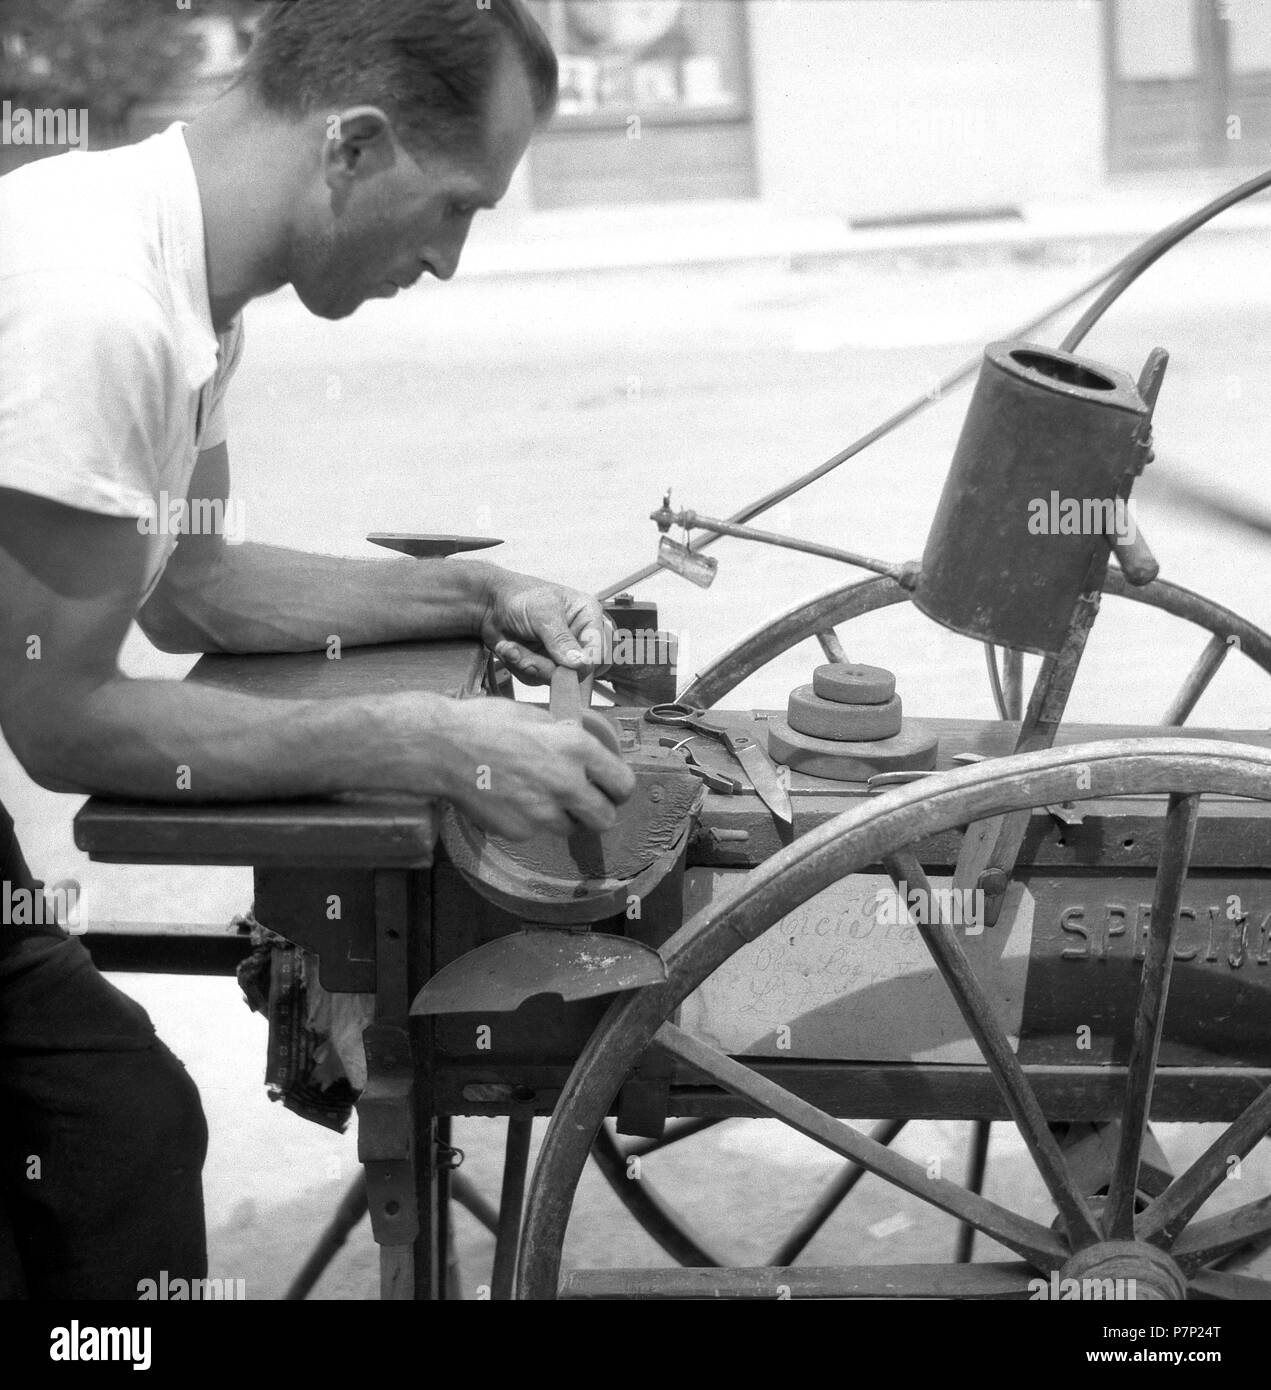 Scissors grinder at work, approx. 1945 to 1955, Freiburg, Germany Stock Photo